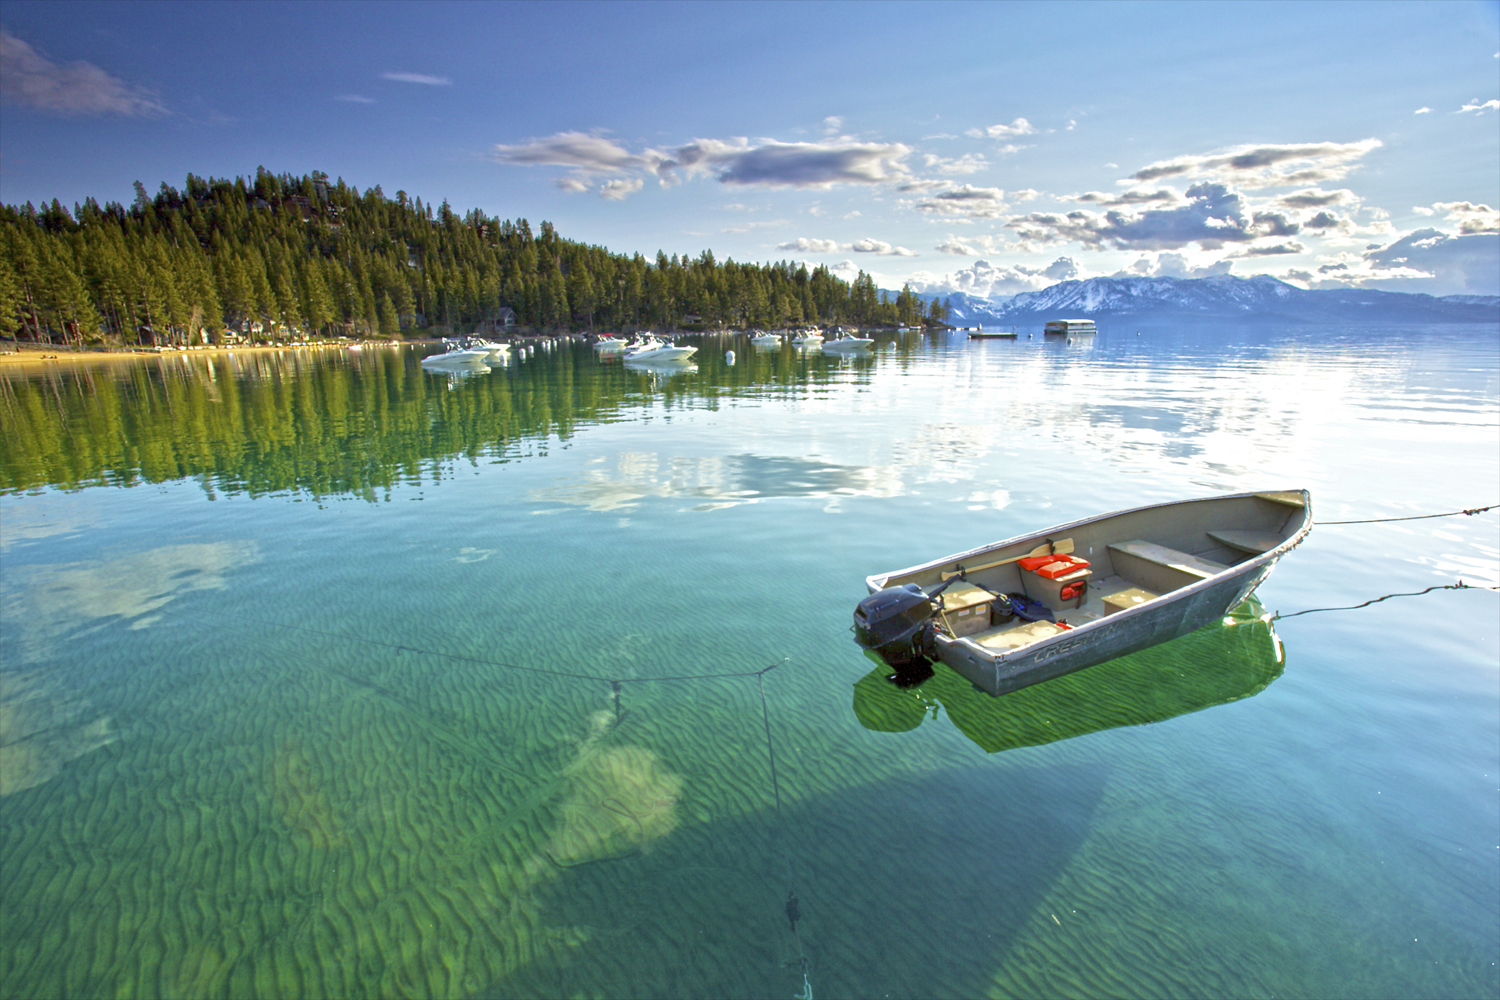 Lake Tahoe’s azure waters are perfect for water sports – or just enjoying relaxing views (© The Landing Resort & Spa).